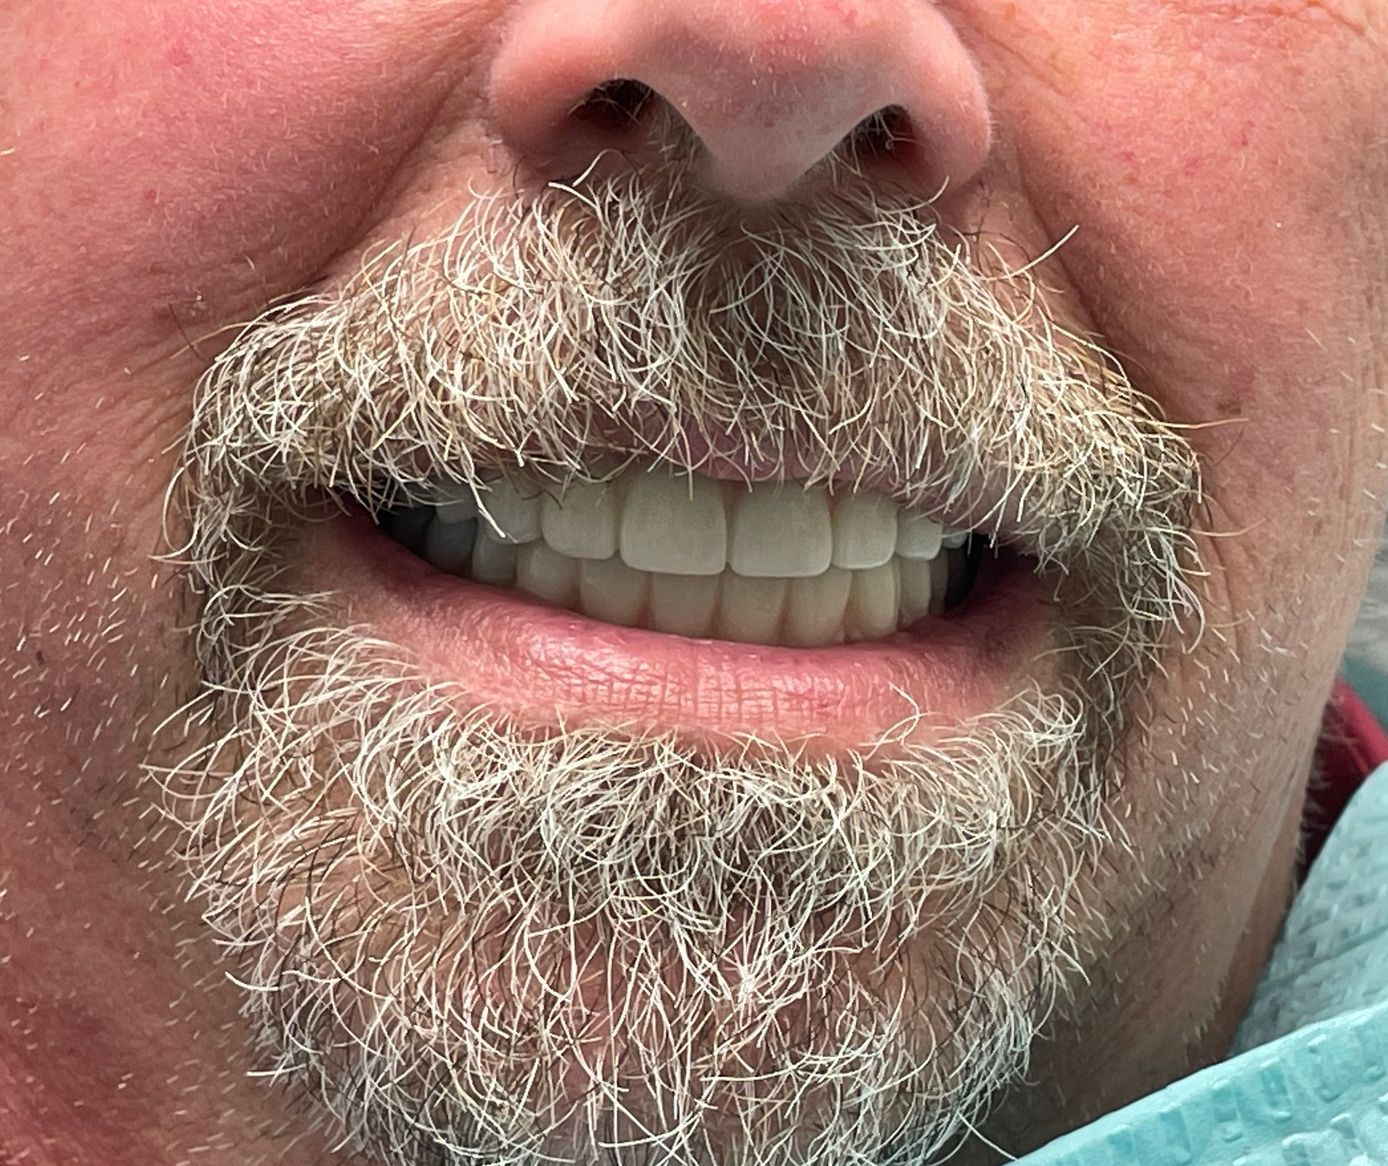 a close up of a man 's mouth with a beard | Before and after dental treatment | All on x dental implants | Full mouth restoration | Barclay Family Dental | Best Dentist For Family Dentistry, Dental Implants, and Cosmetic Dentistry in Cherry Hill, NJ